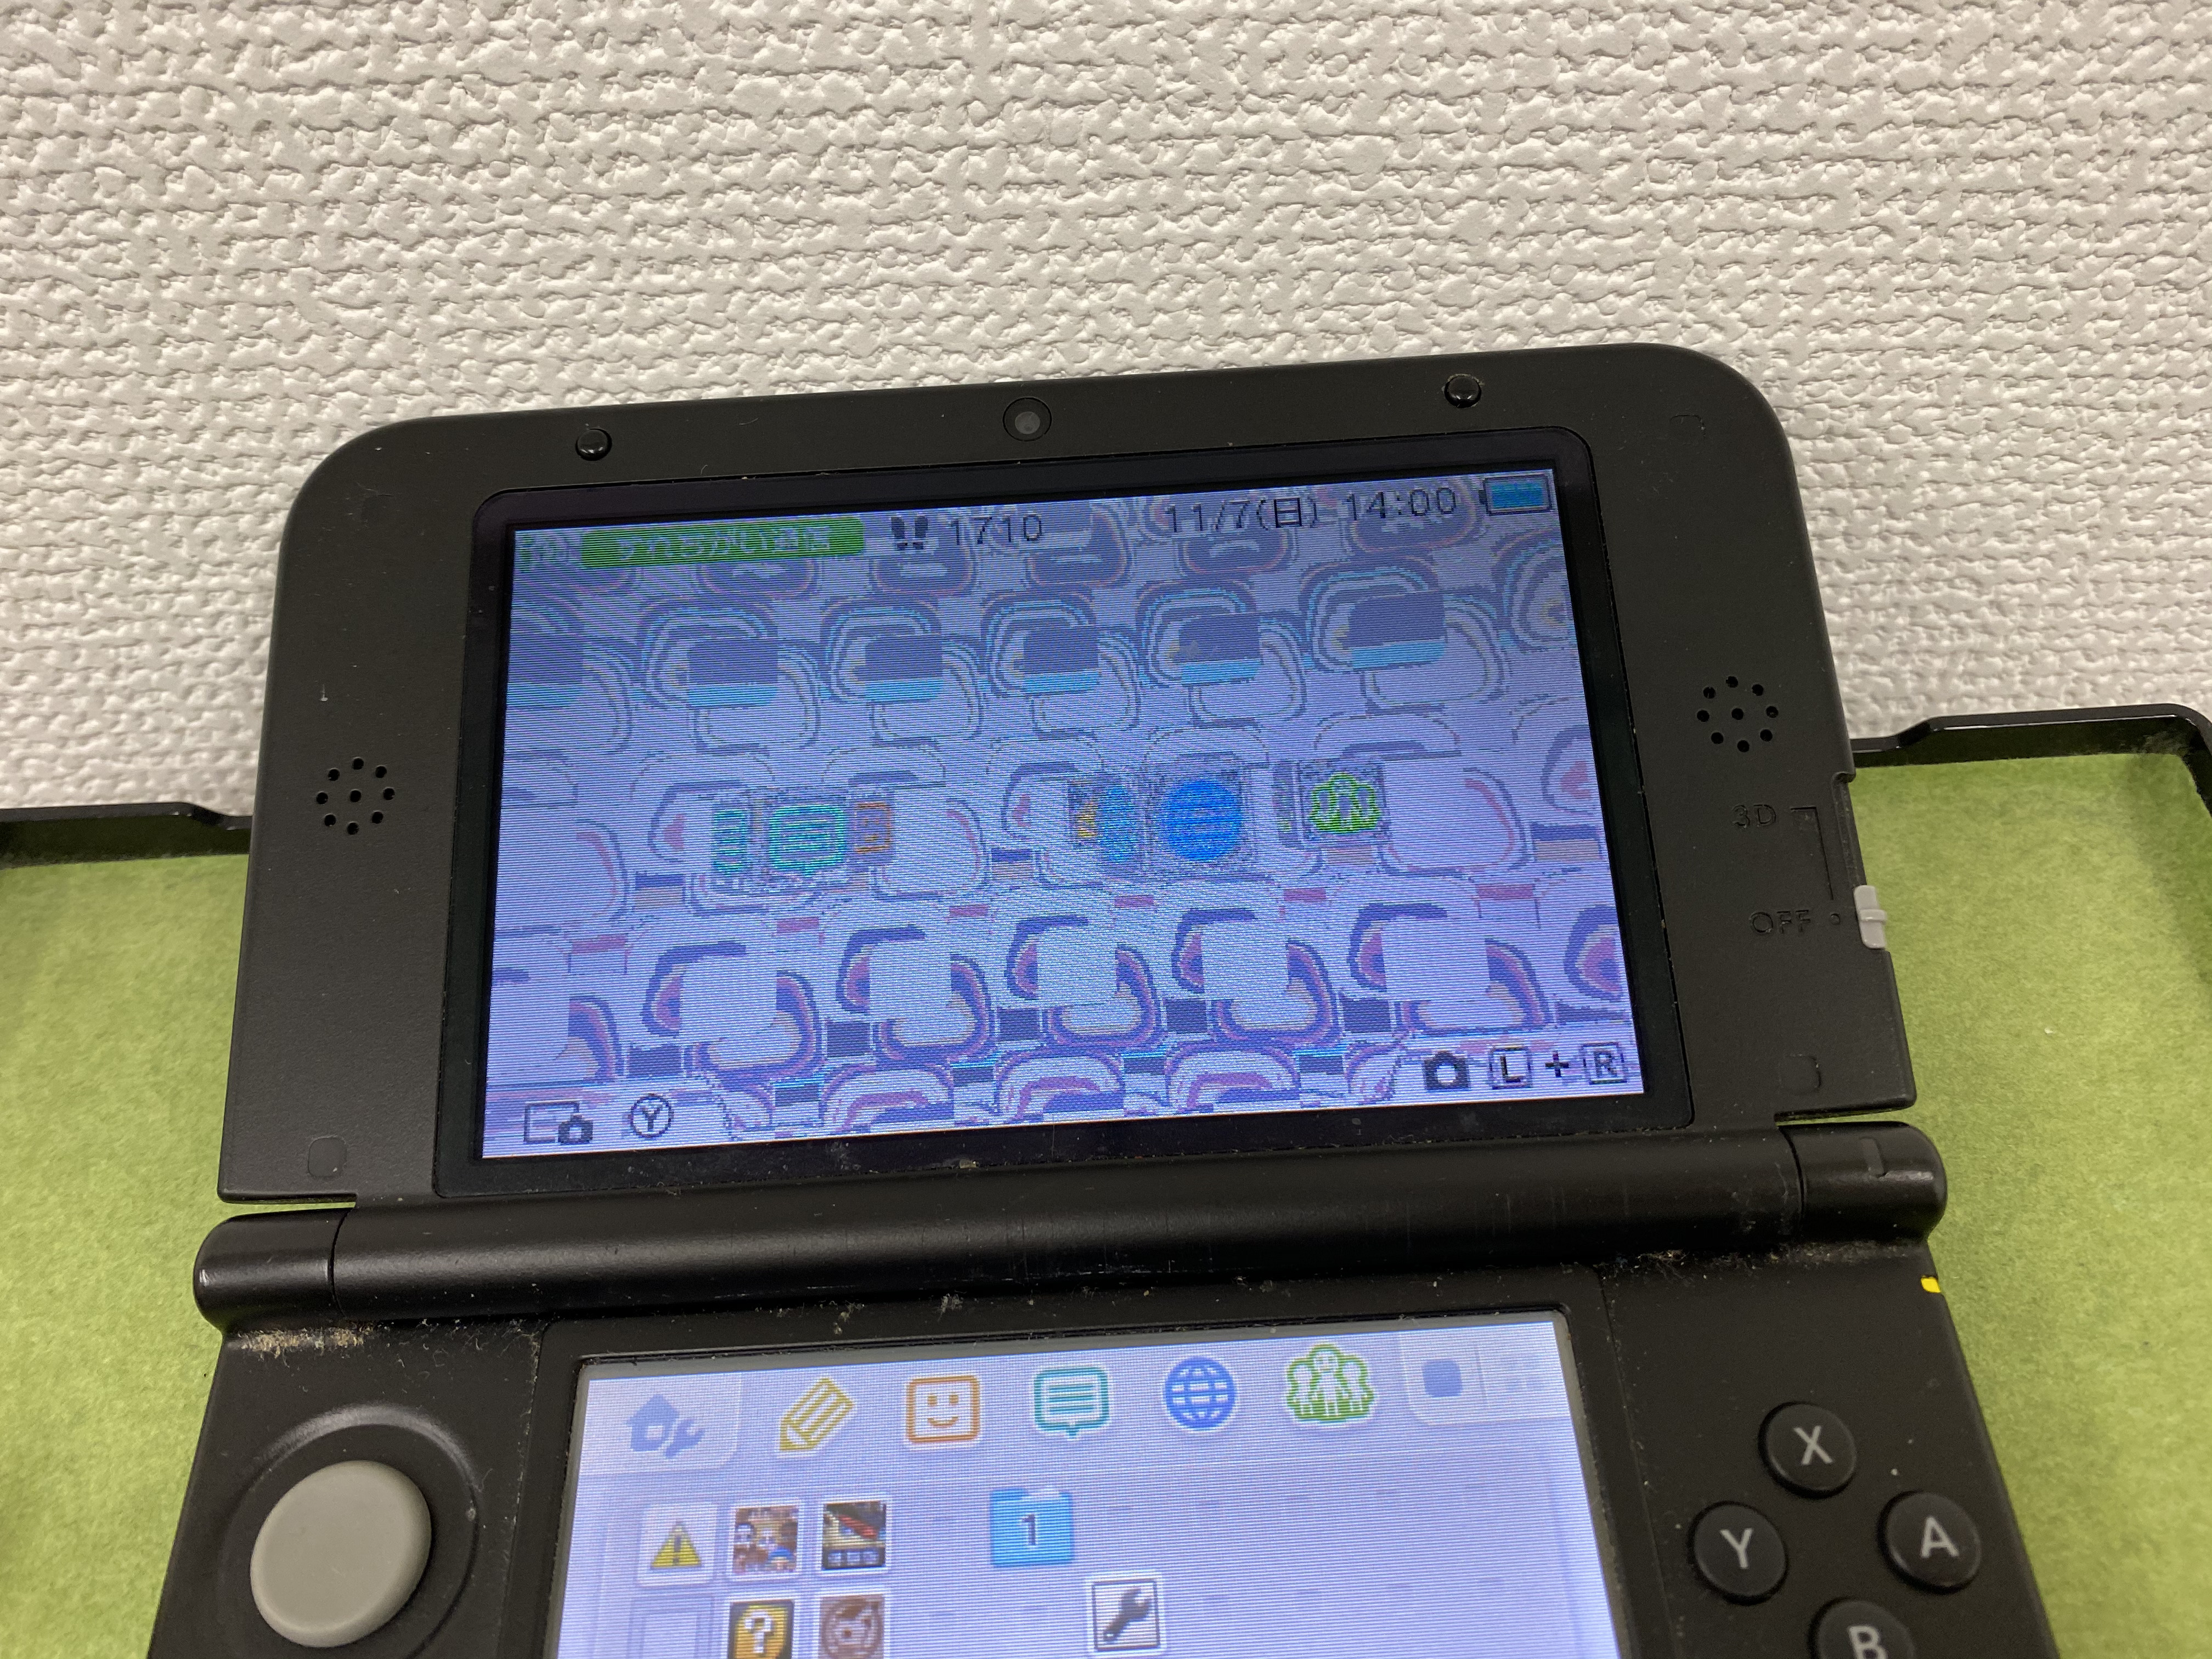 2DS 3DS 3DSLL new 3DS スライドパッド 2個セット